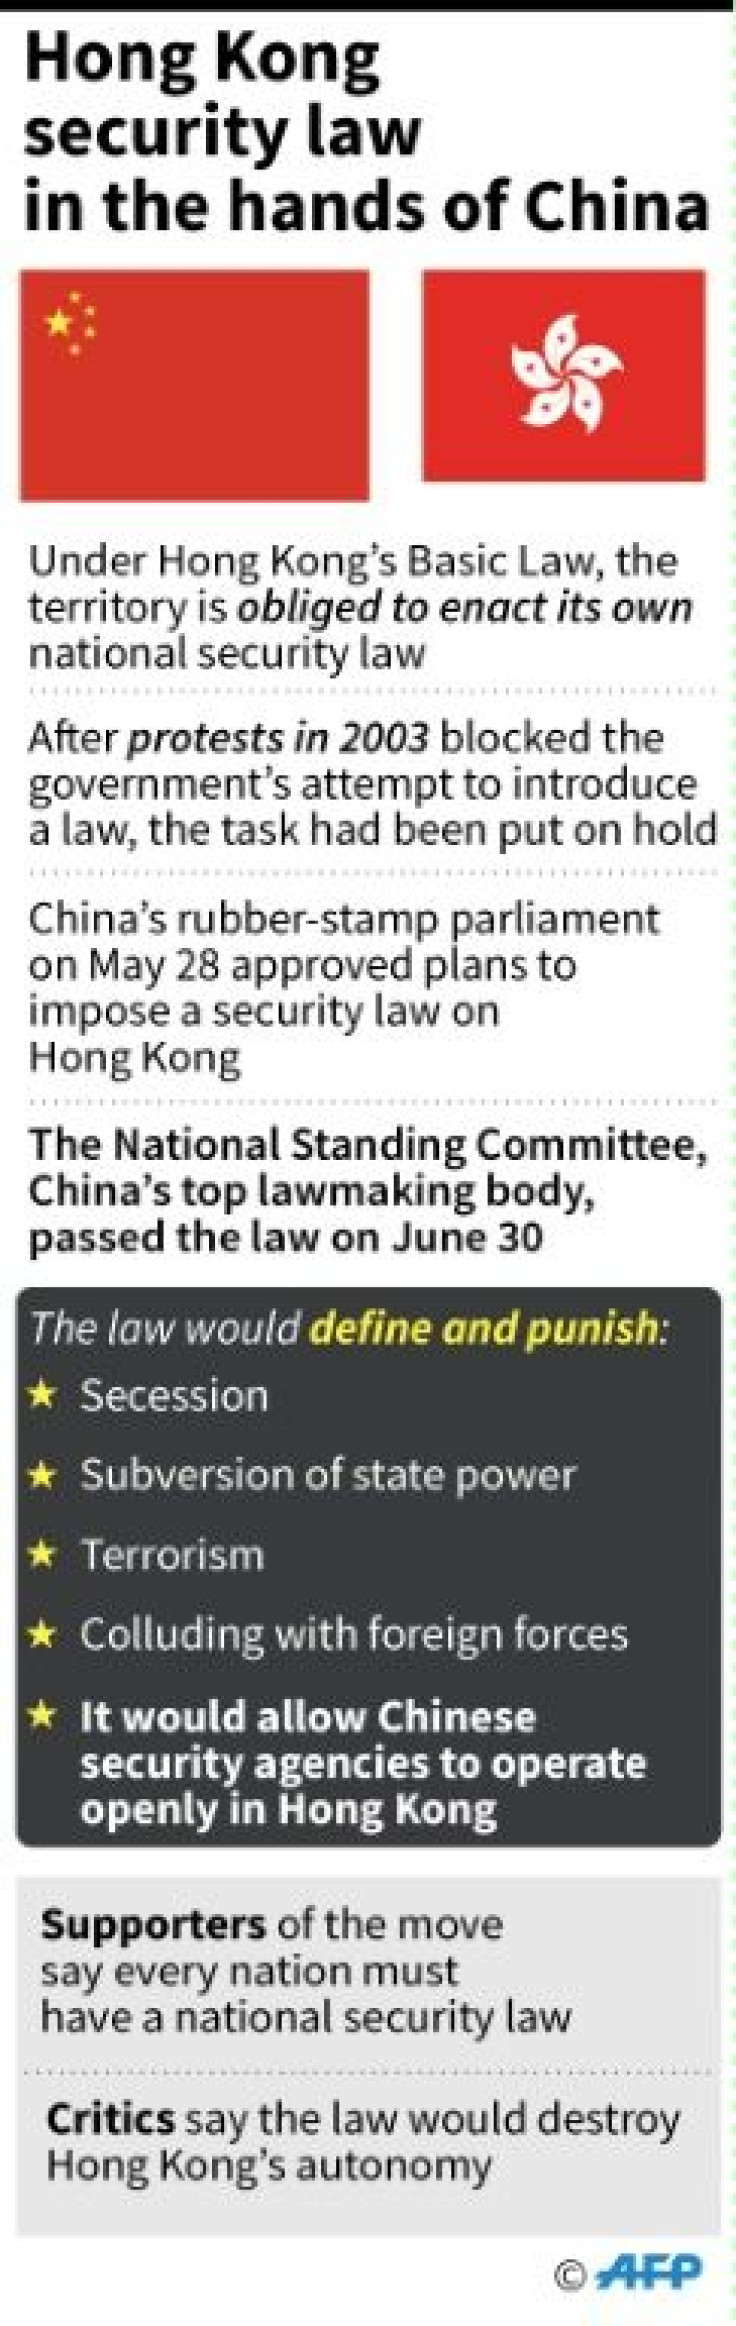 Outline of main points that could be covered in the new national security law that China imposed on Hong Kong on Tuesday